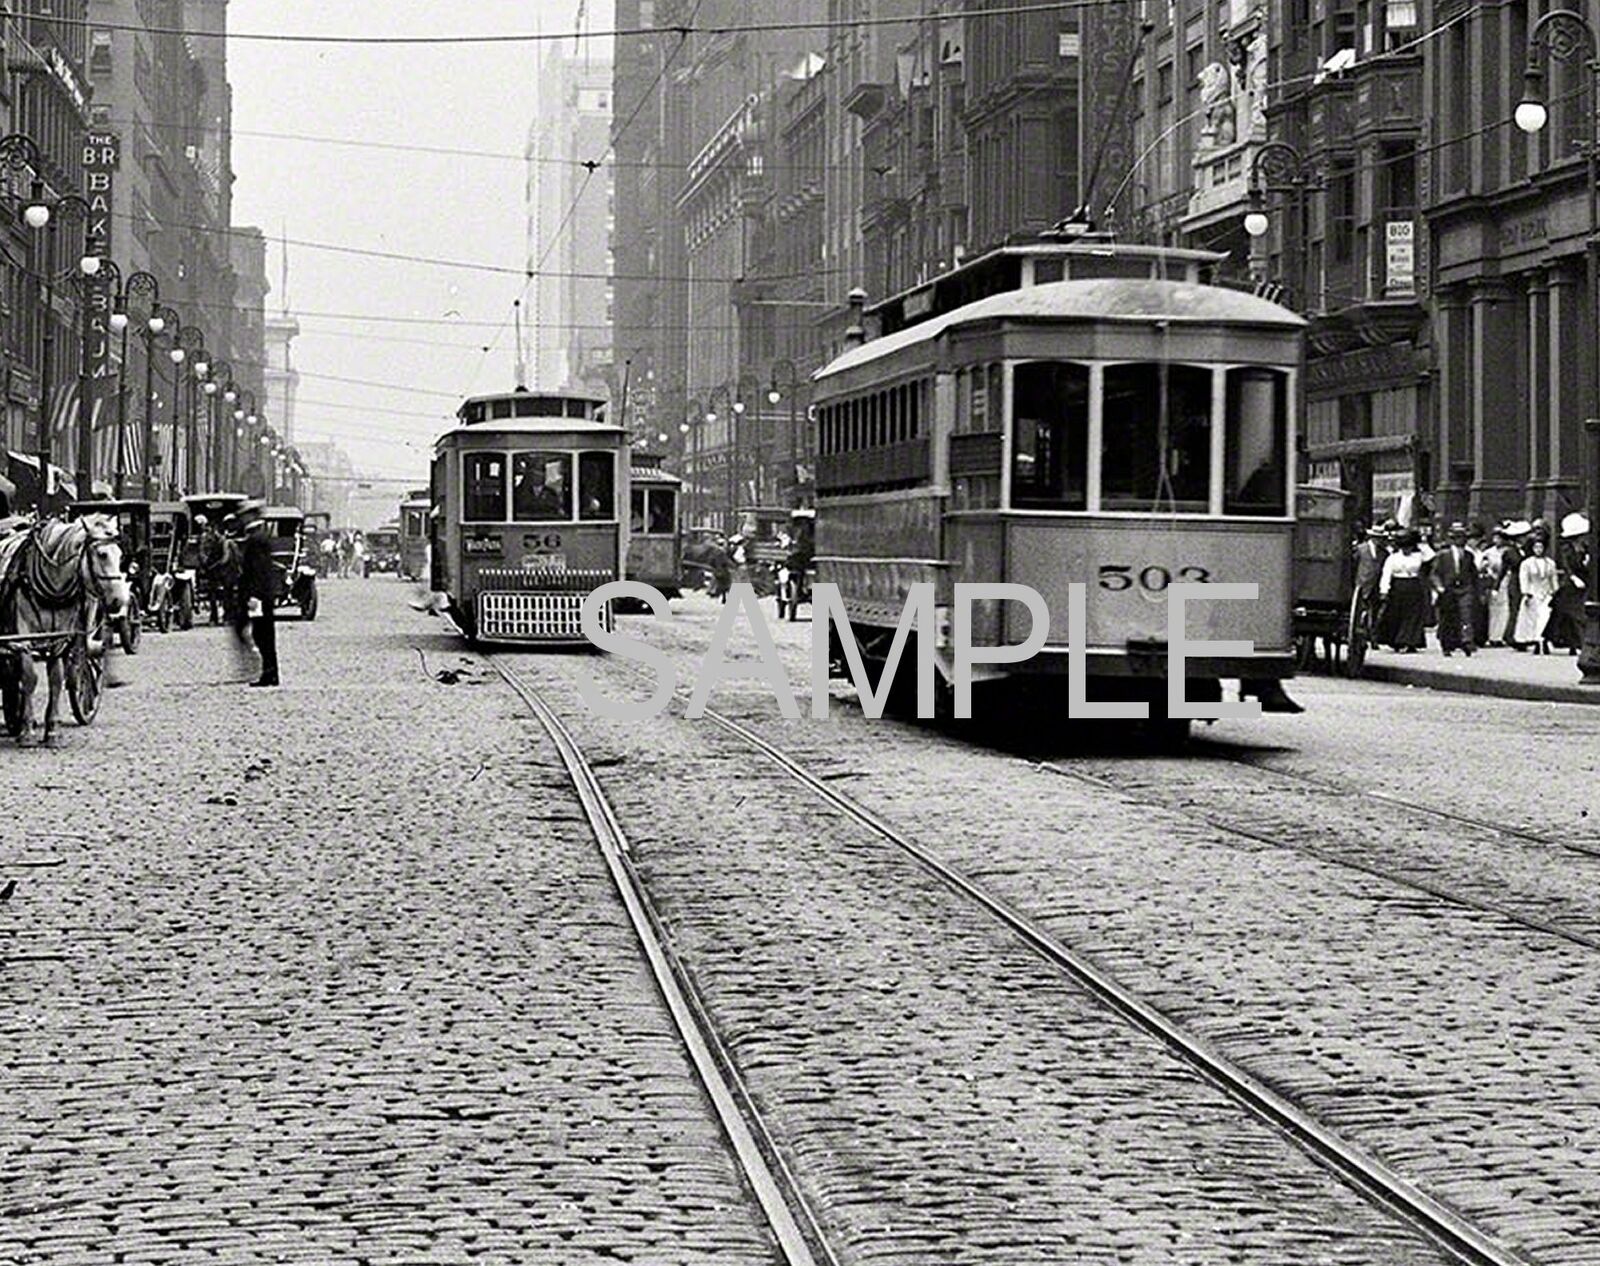 1911 STREET CARS in CLEVELAND 8.5x11 Photo